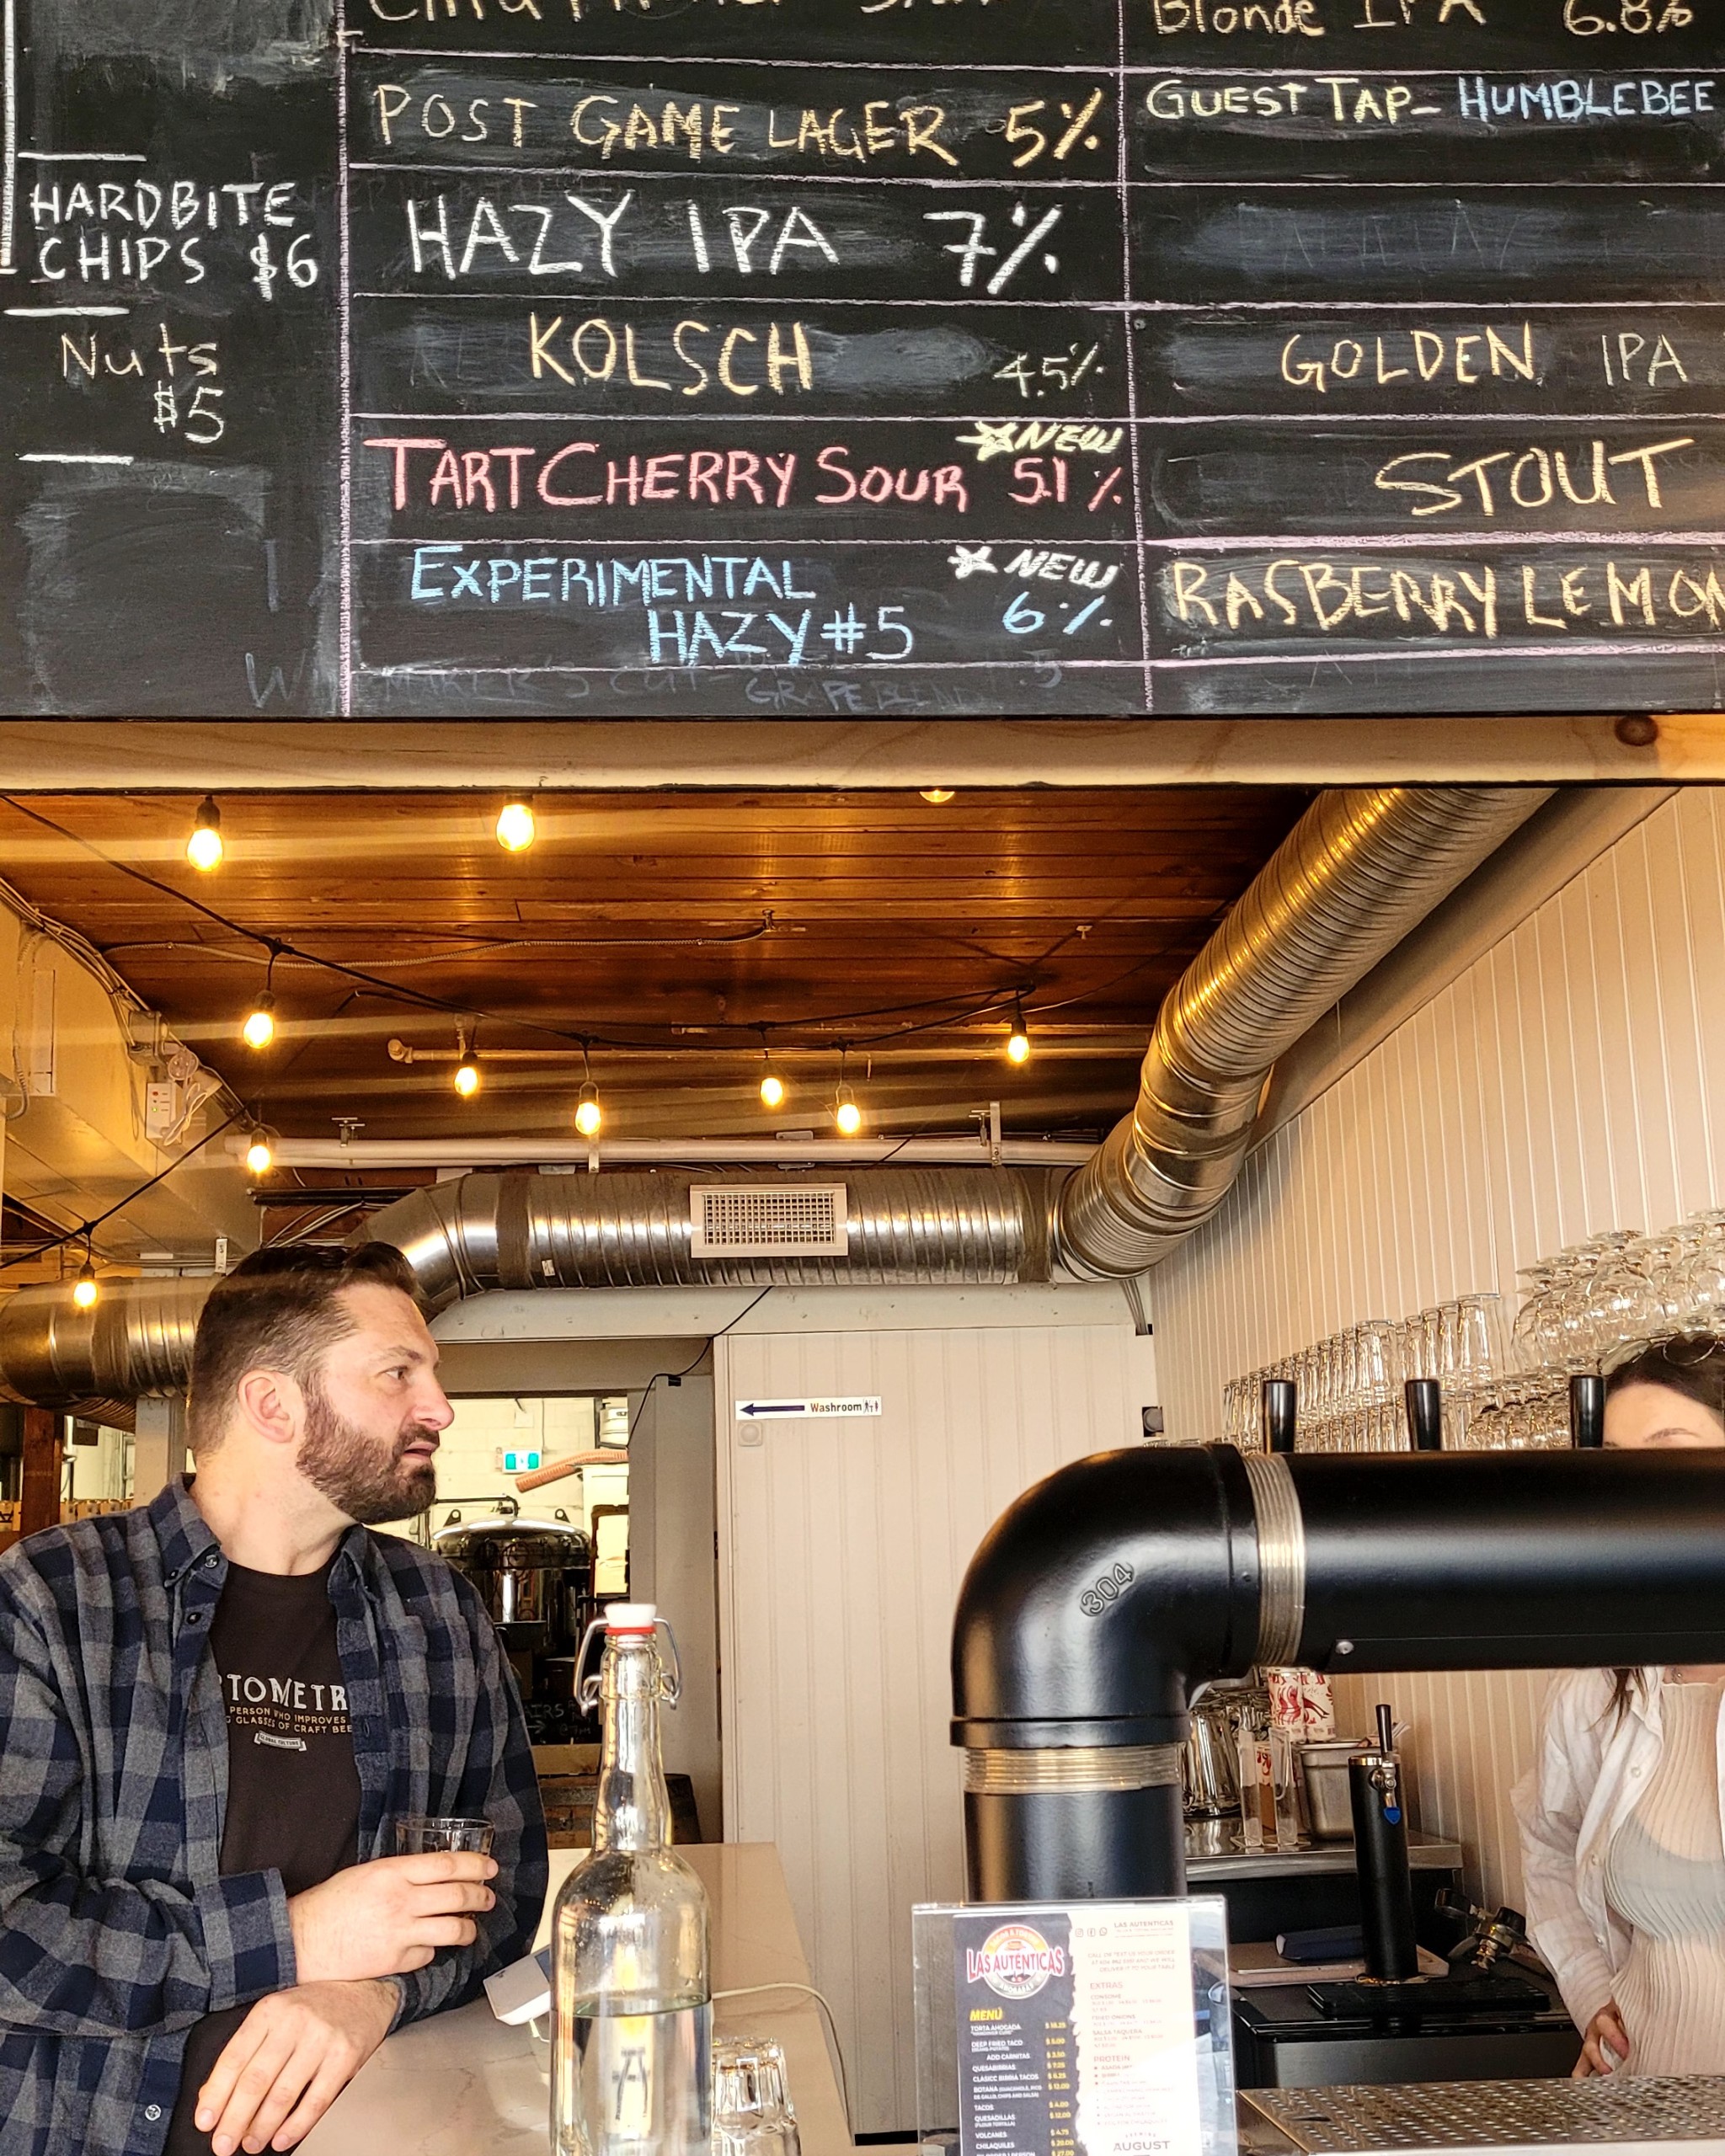 Explore Vancouver's Craft Beer Scene with the Vancouver Tasting Passport ·  The BC Ale Trail